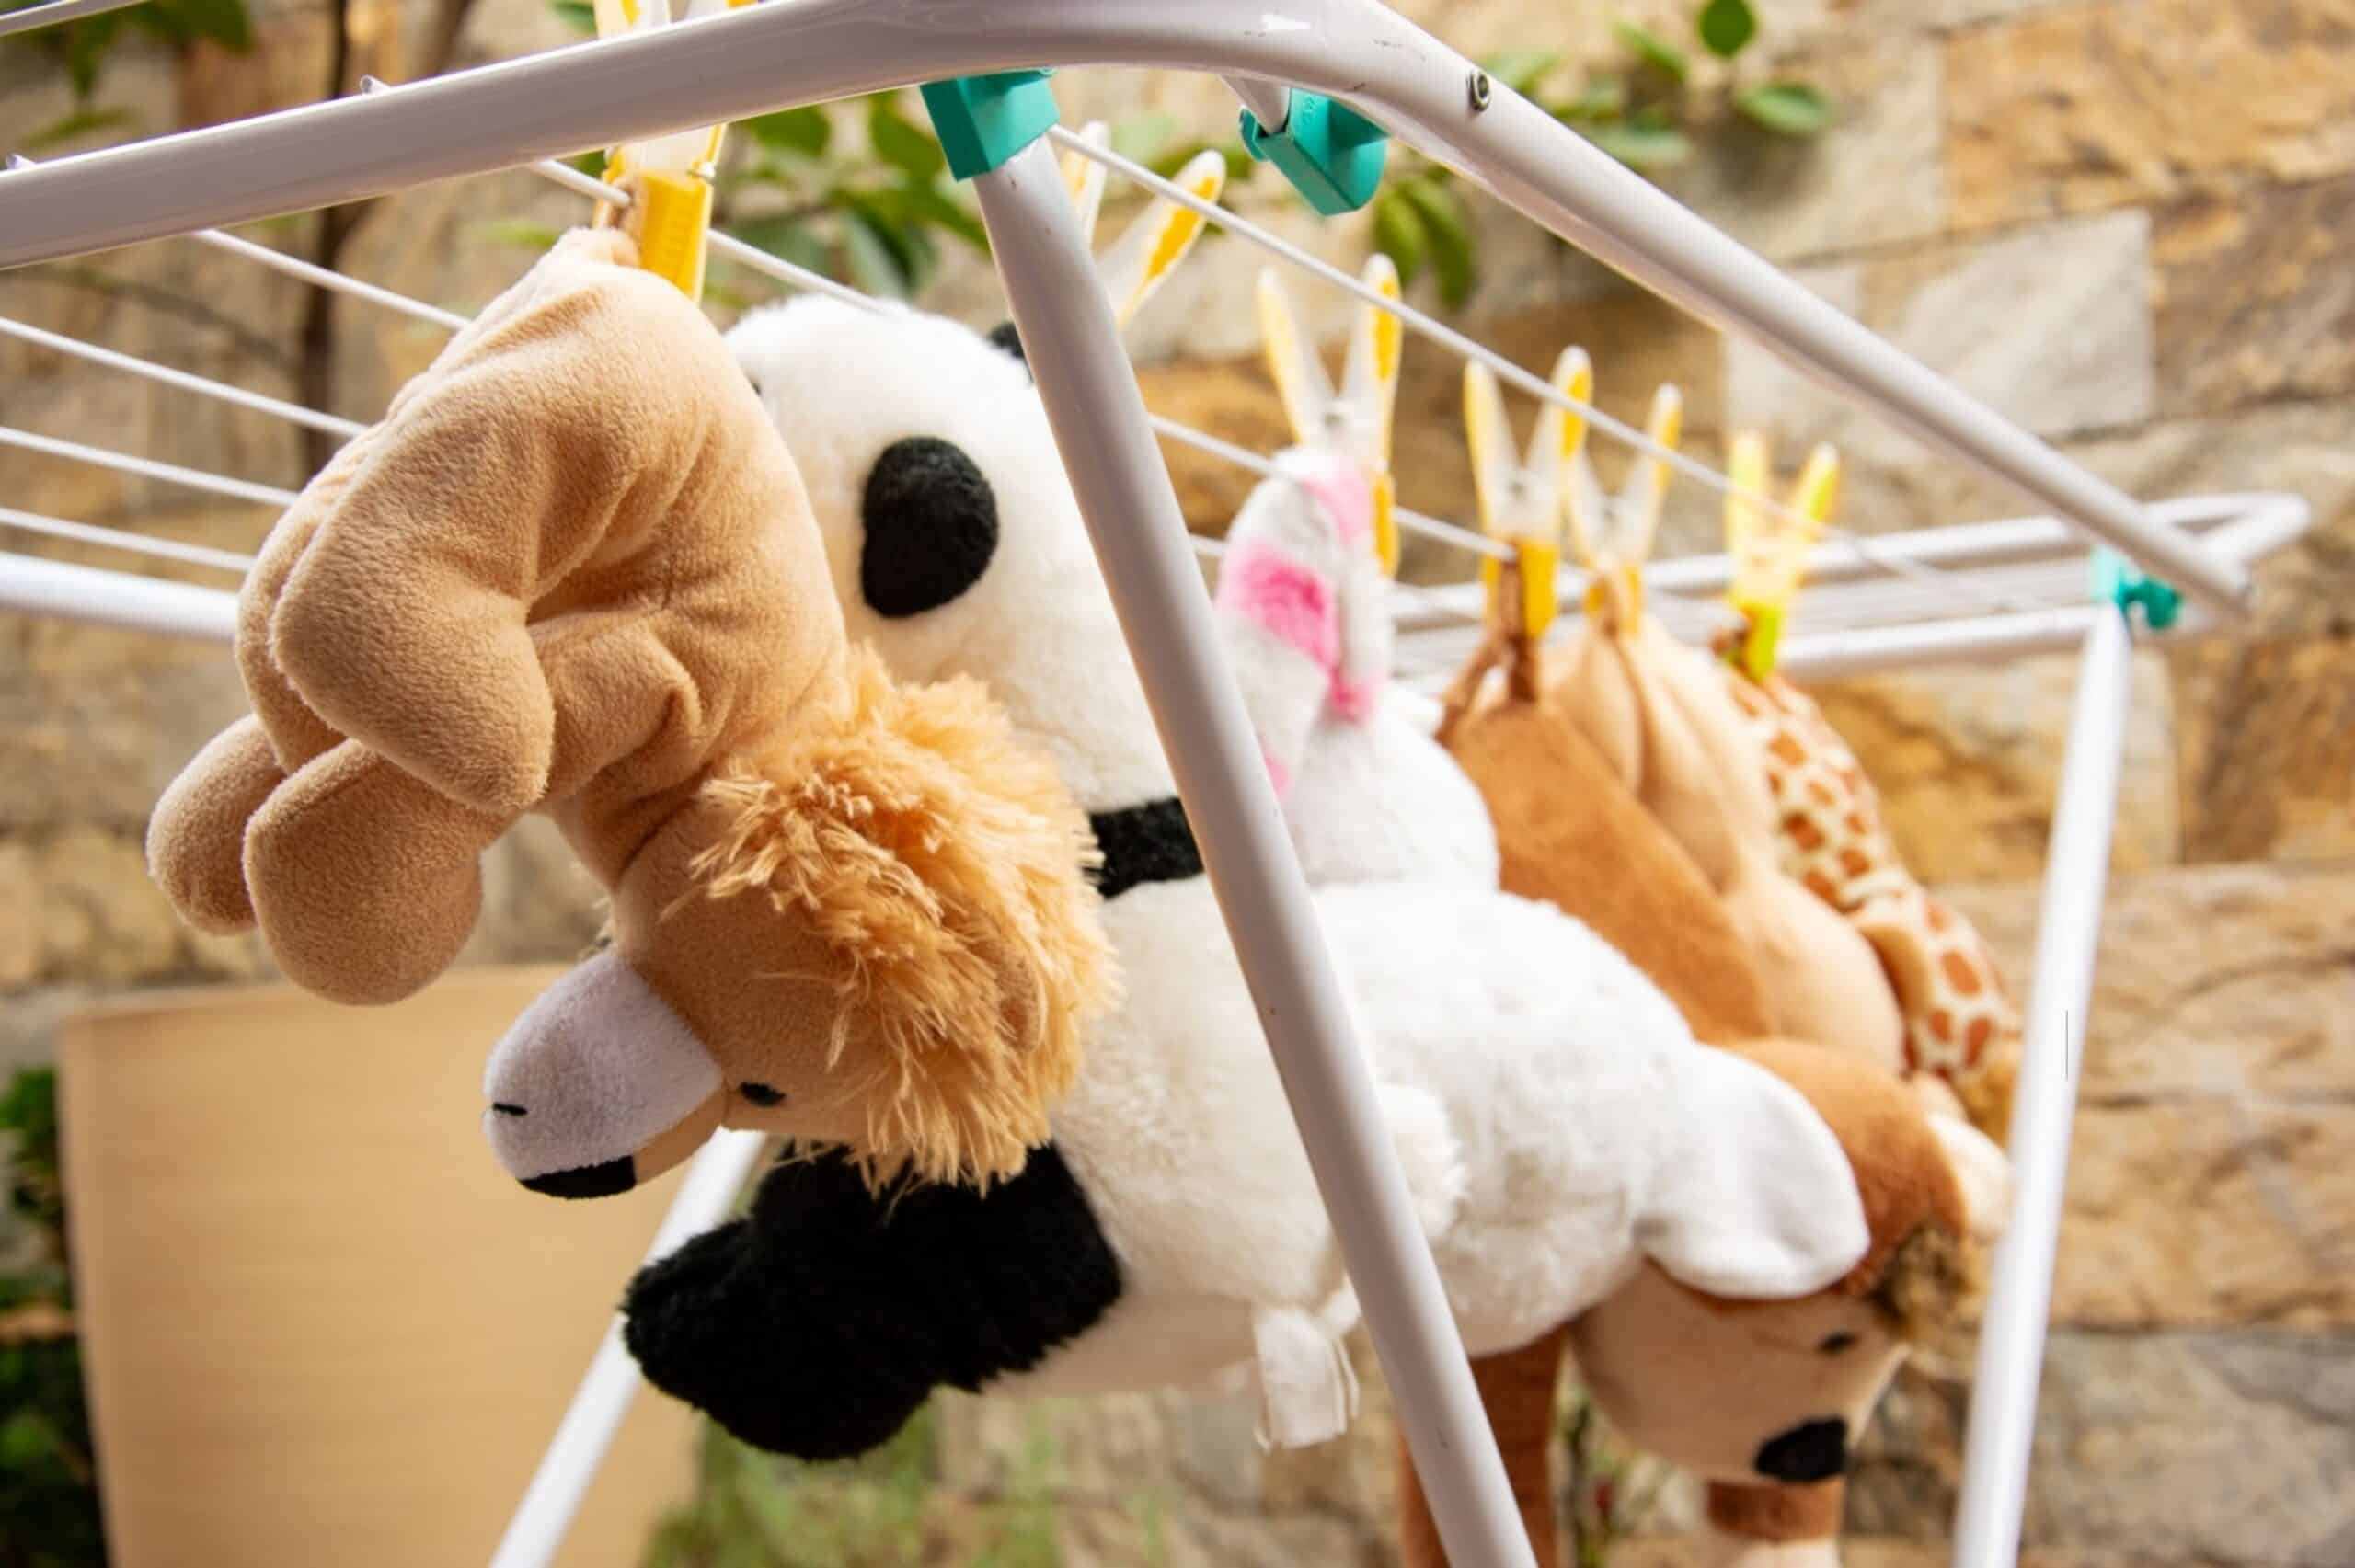 How to Wash Stuffed Animals Tidyhere Image of Stuffed Animals Drying on the Clothesline